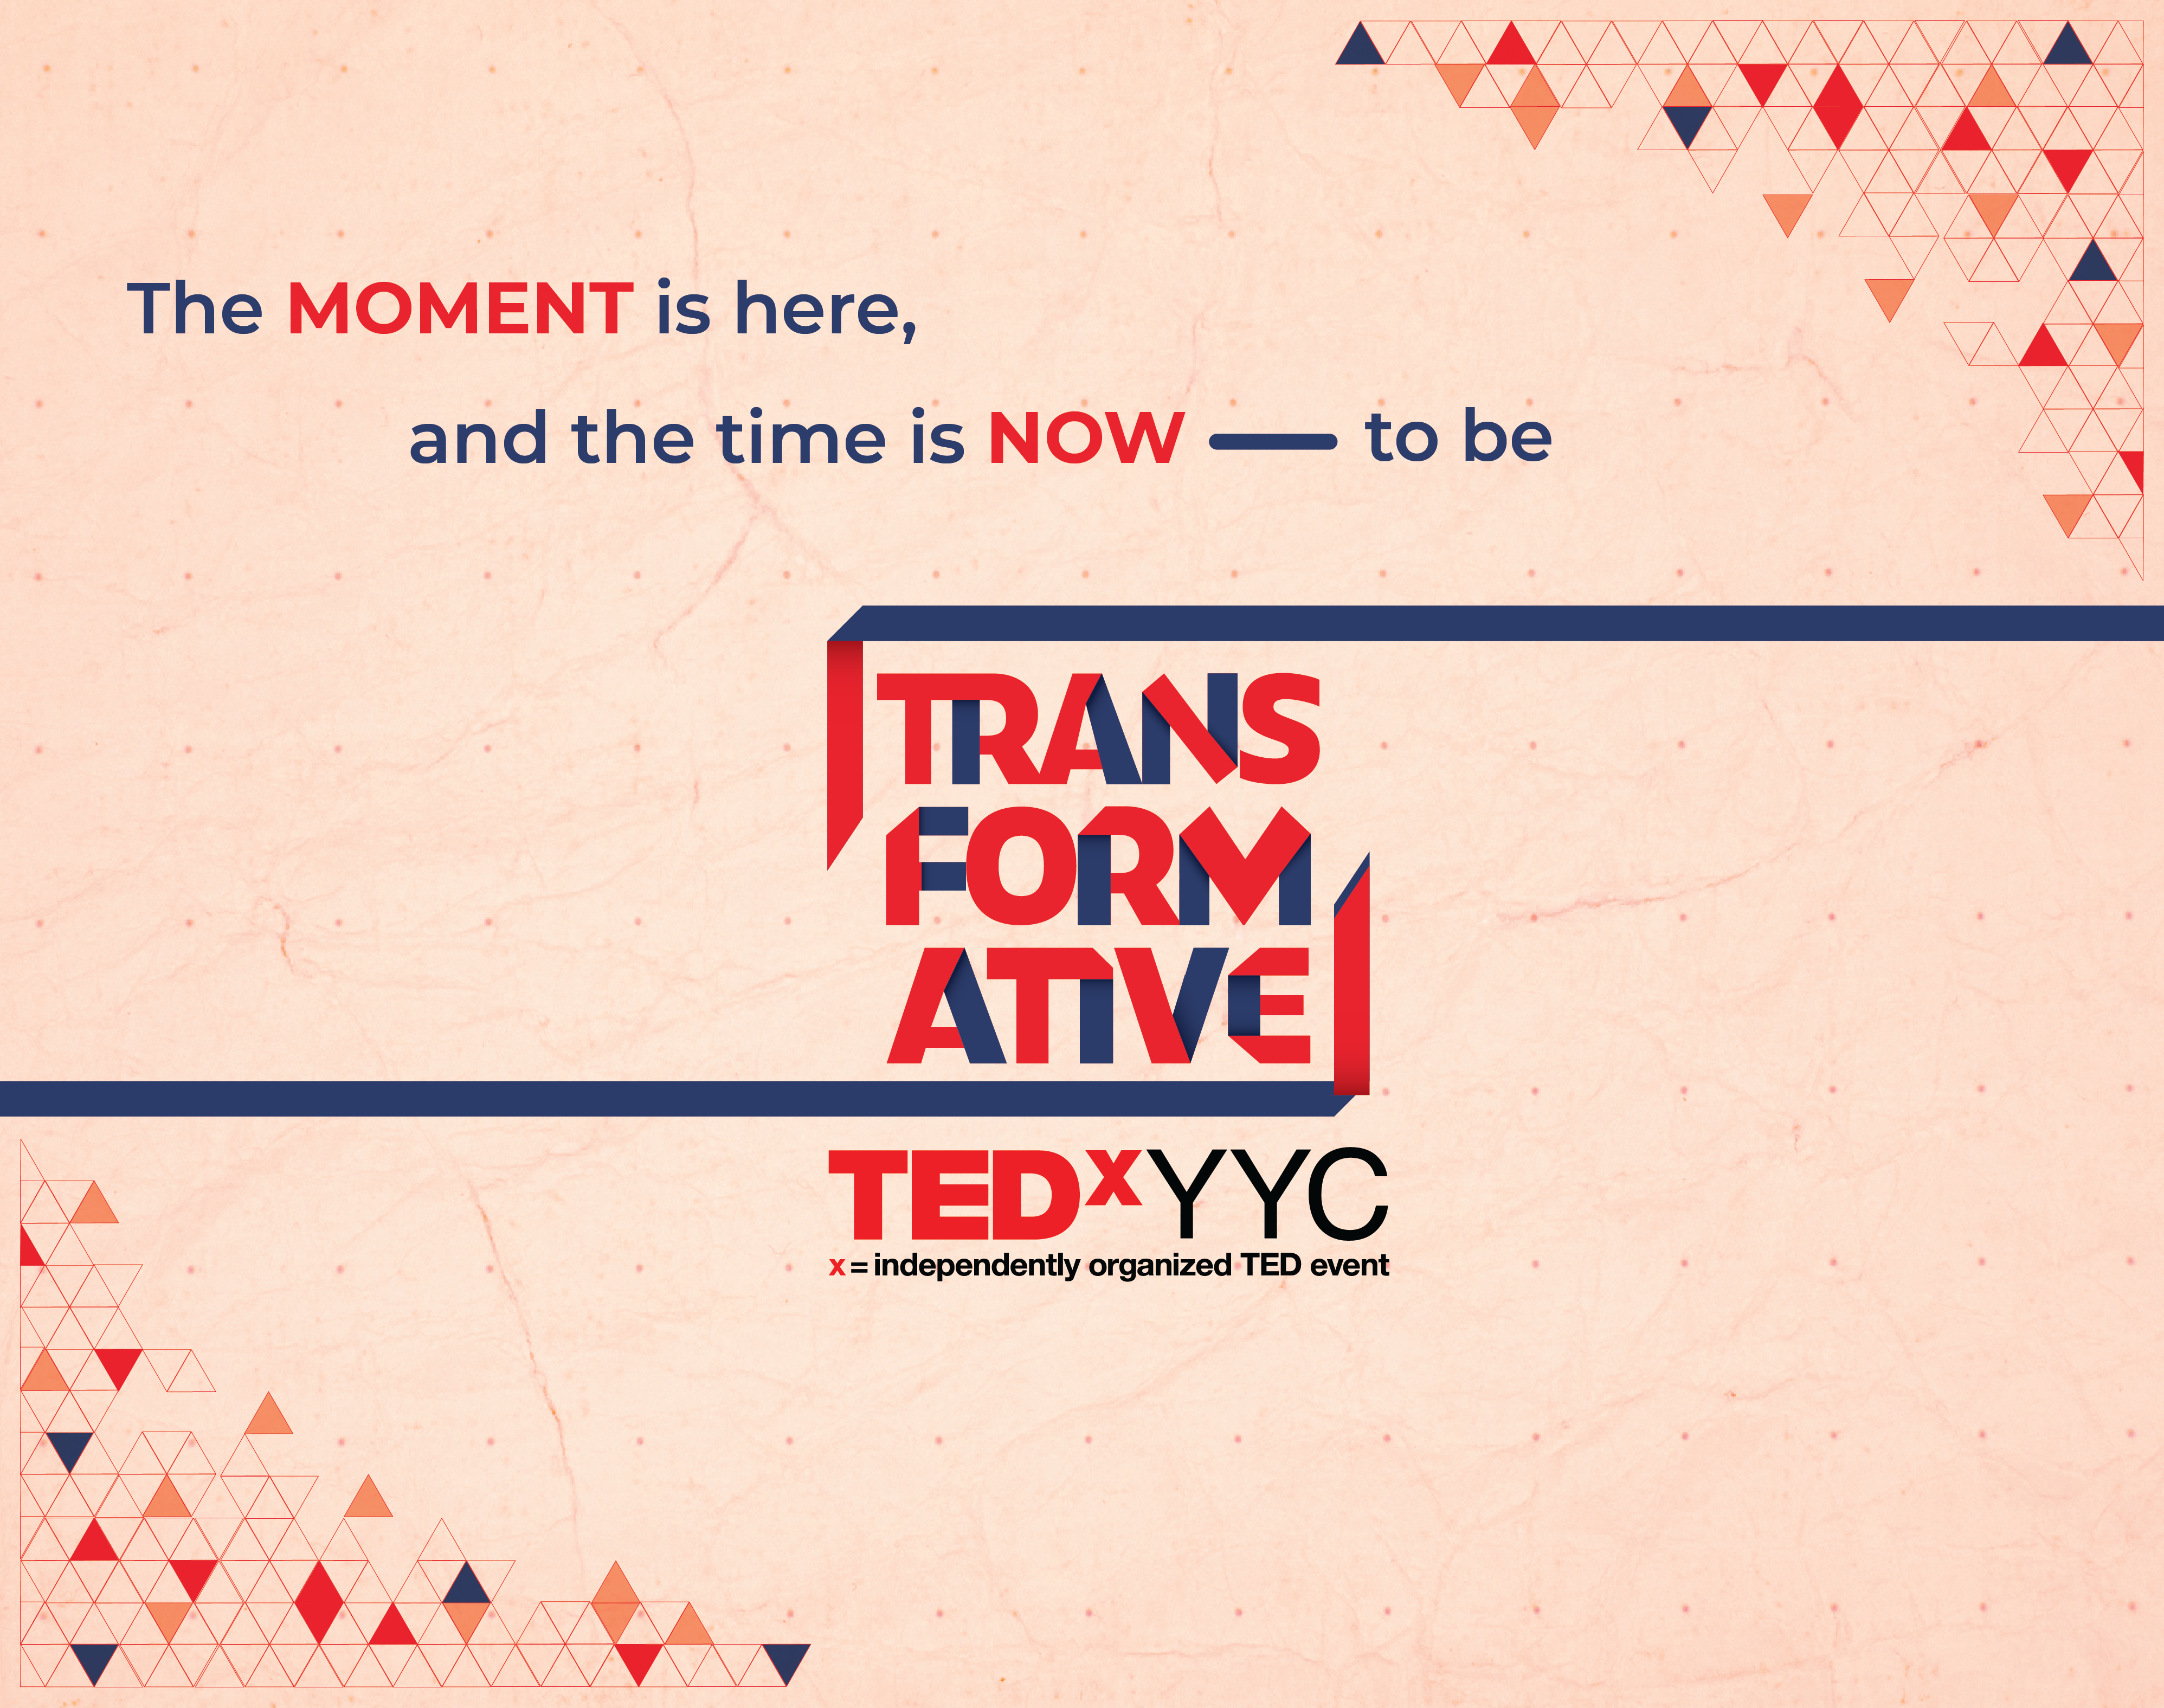 What to expect at TEDxYYC Transformative